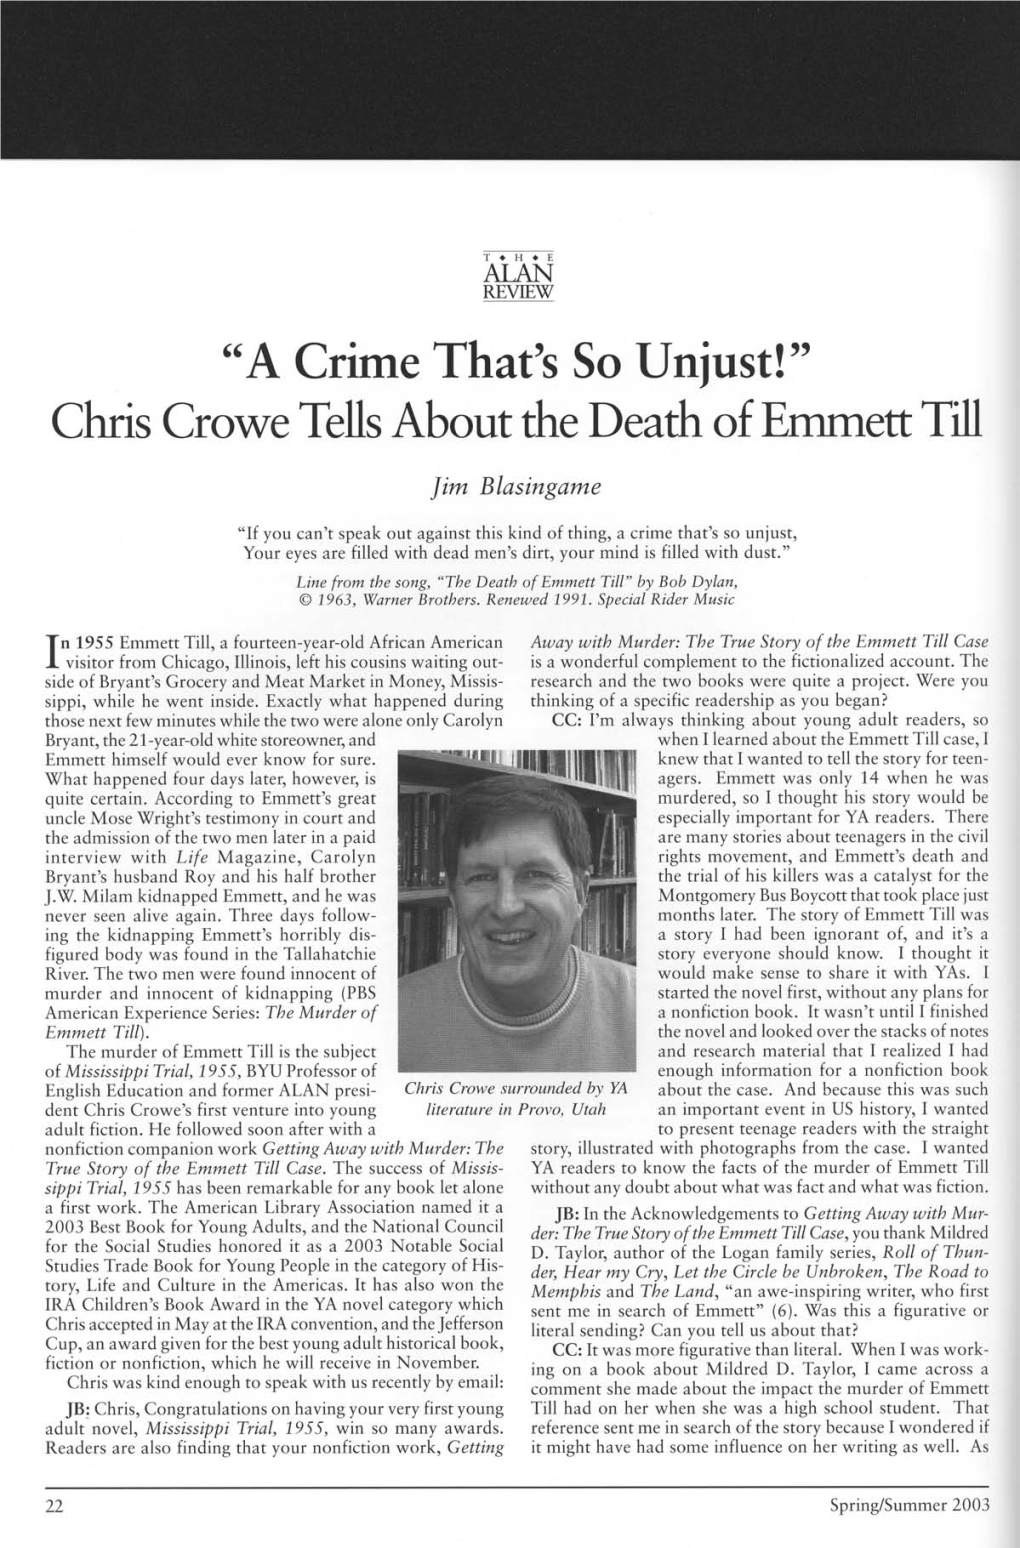 ALAN V30n3 "A Crime That's So Unjust!": Chris Crowe Tells About